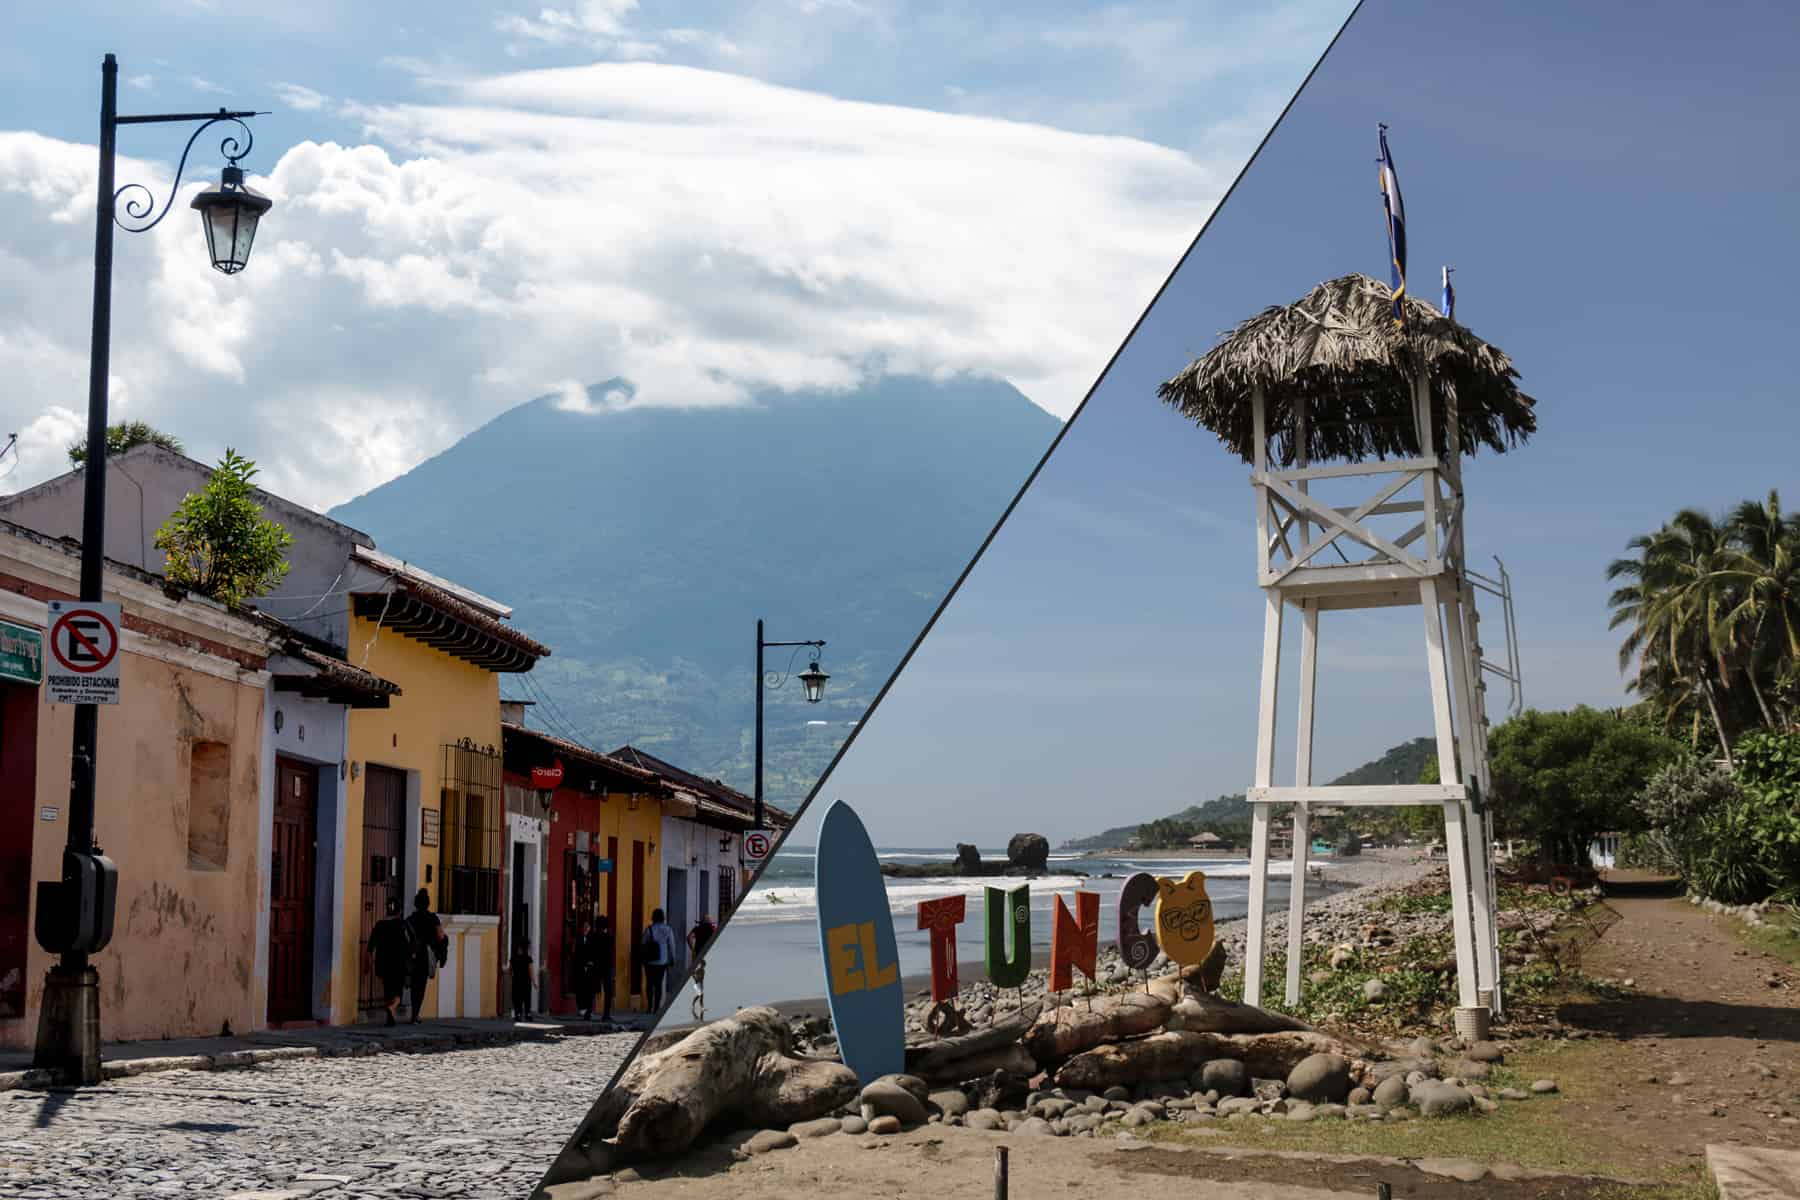 Two photos. A street and volcano on the left, a lifeguard tower on the right in Guatemala and El Salvador